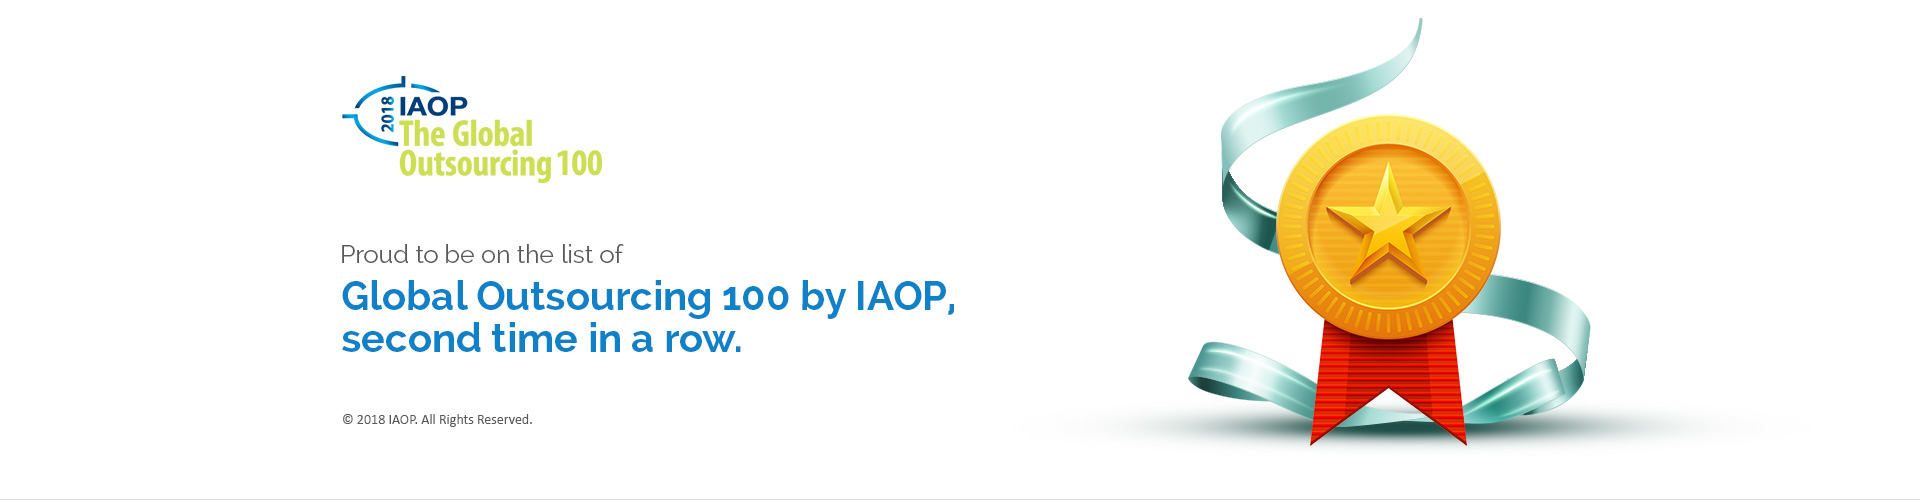 IMS People Possible featured on IAOP Global Outsourcing 100 list®